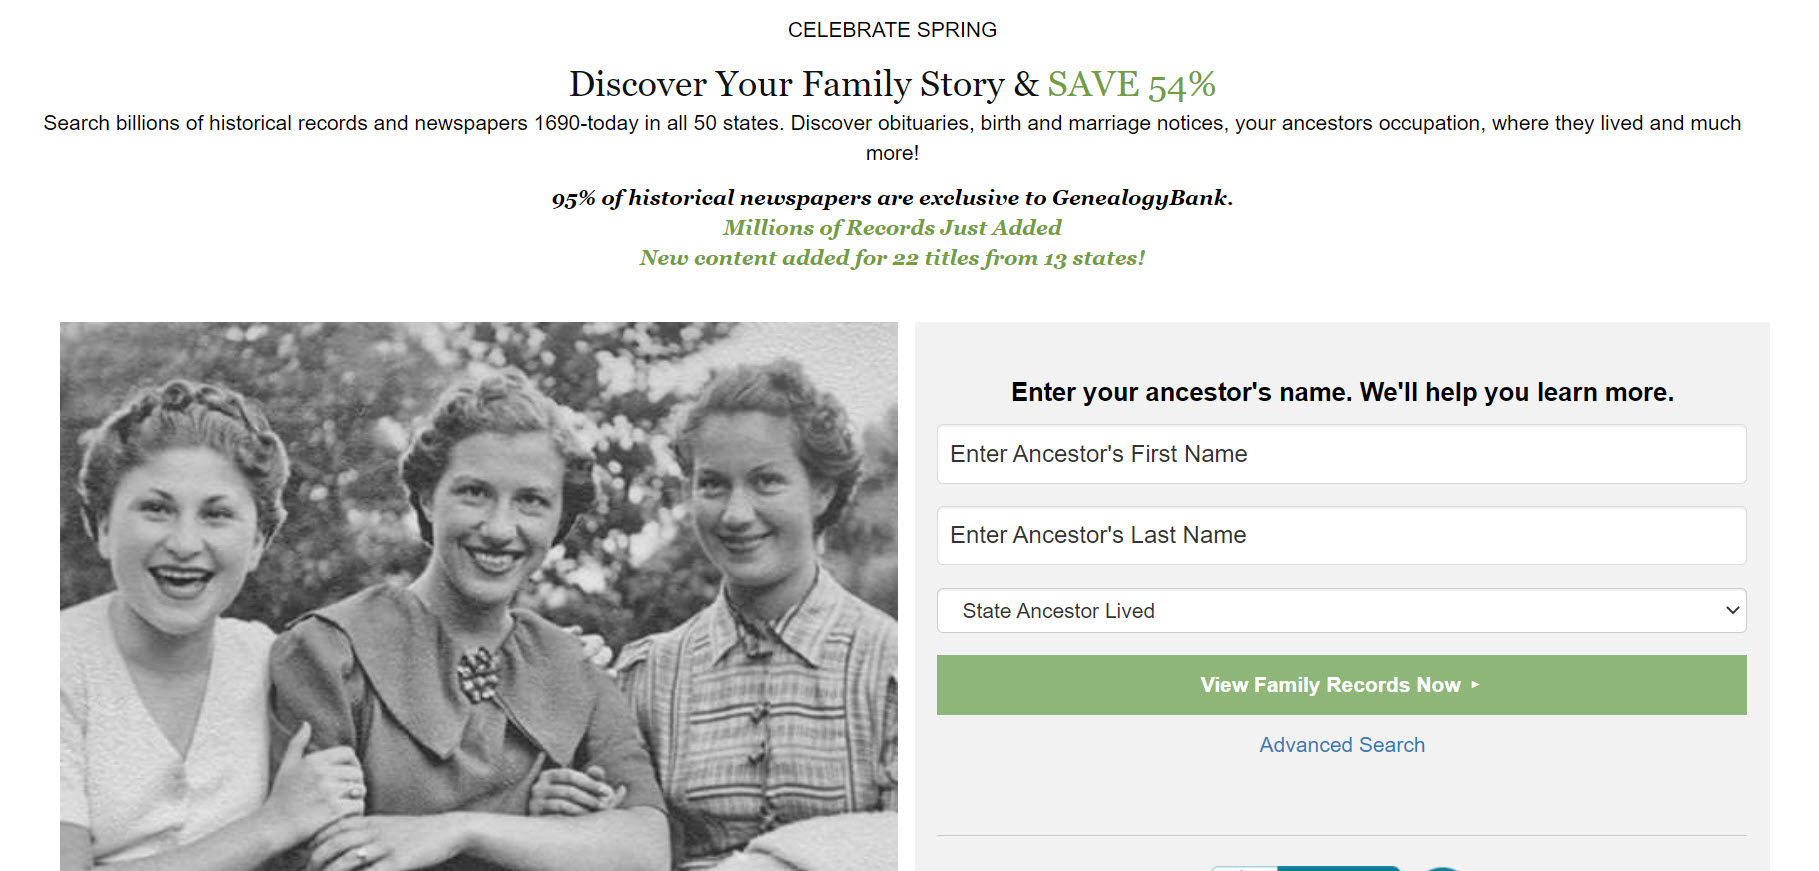 I can't begin to tell you that I could not make progress with my own genealogy research without GenealogyBank. Did you know that 95% of historical newspapers are exclusive to GenealogyBank? Search billions of historical records and newspapers 1690-today in all 50 states. Discover obituaries, birth and marriage notices, your ancestors occupation, where they lived and much more.